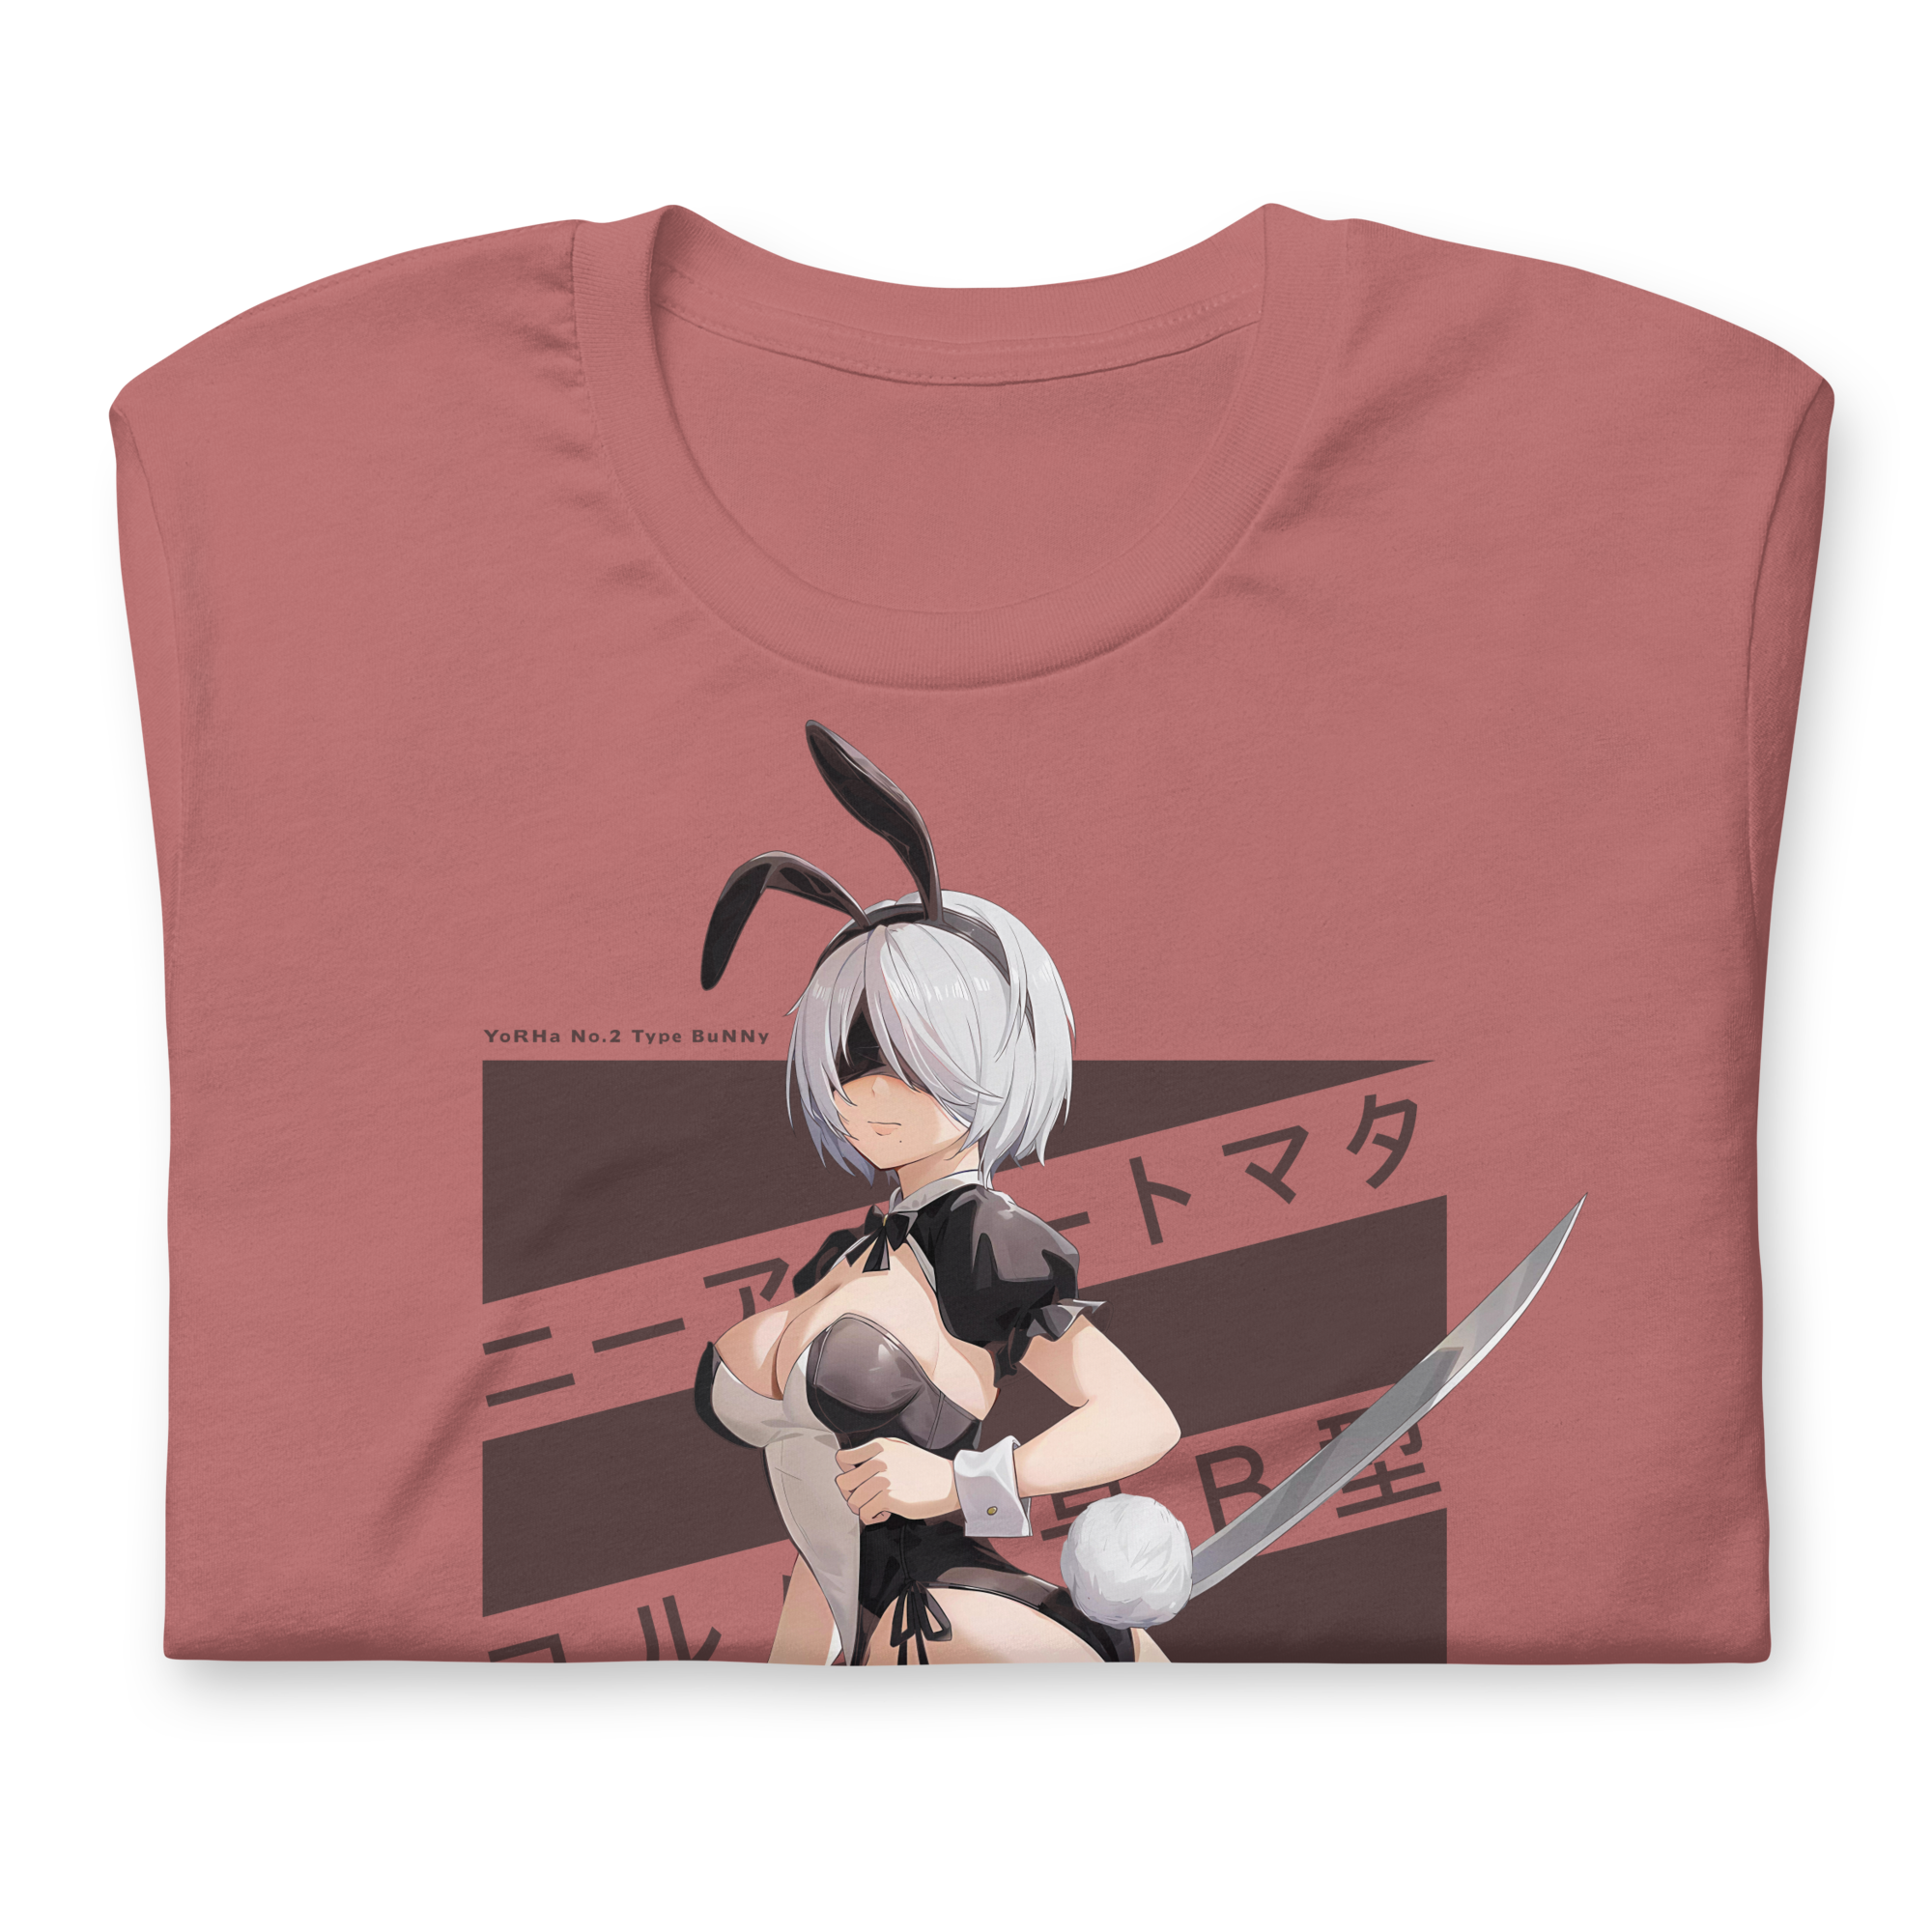 [LIMITED] 2B (Type Bunny) - T-Shirt